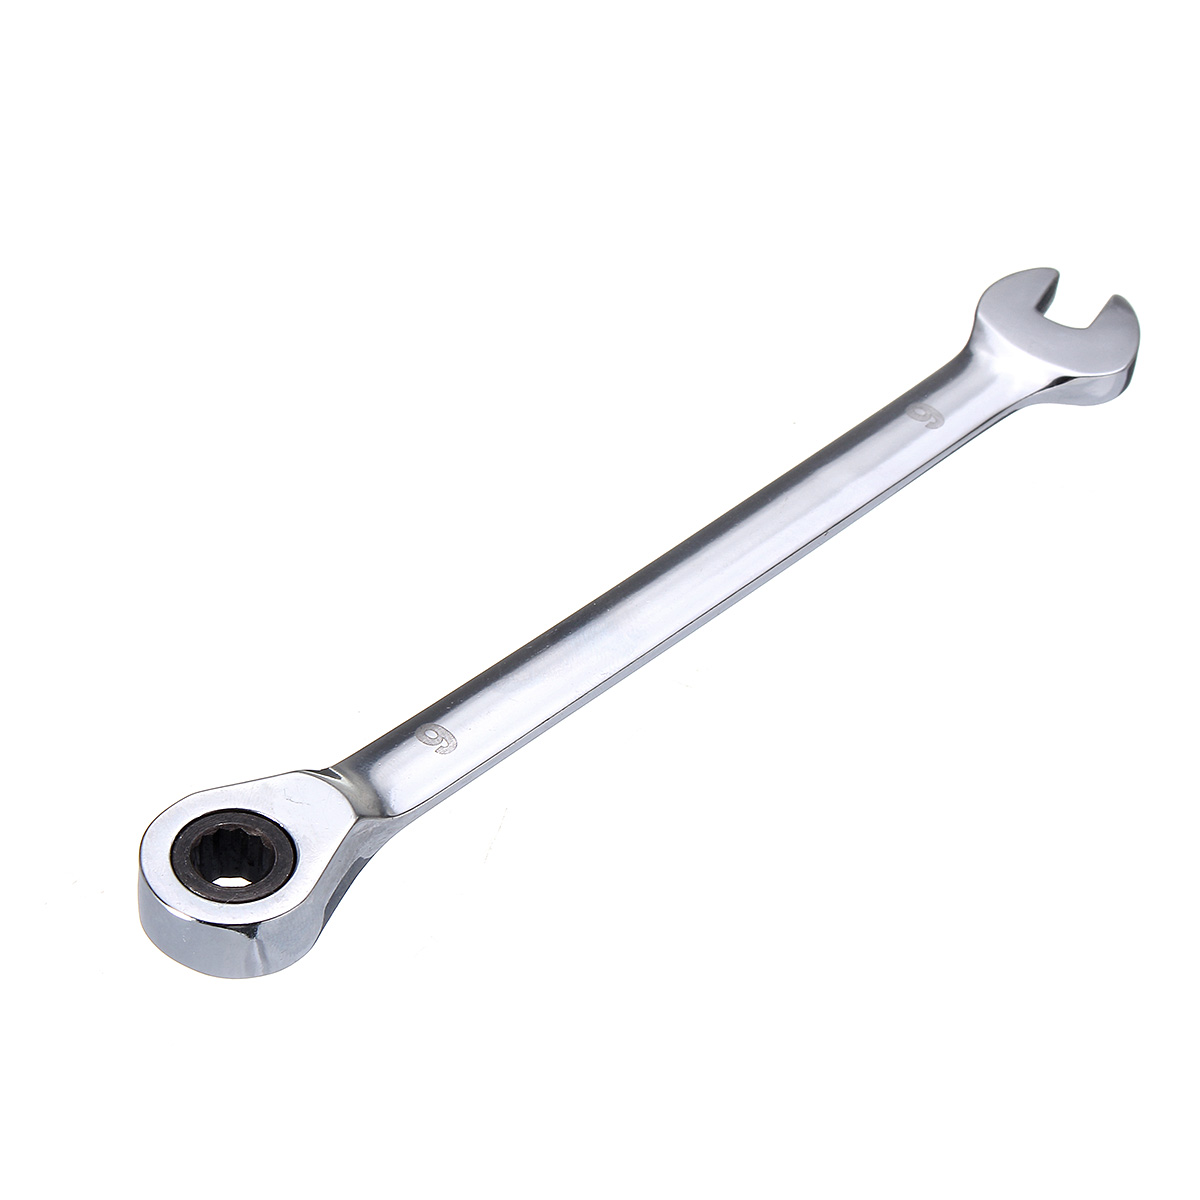 72-Teeth-Chrome-Vanadium-Steel-Fixed-Head-Ratchet-Spanner-Wrench-Open-End-Ring-Tool-1147184